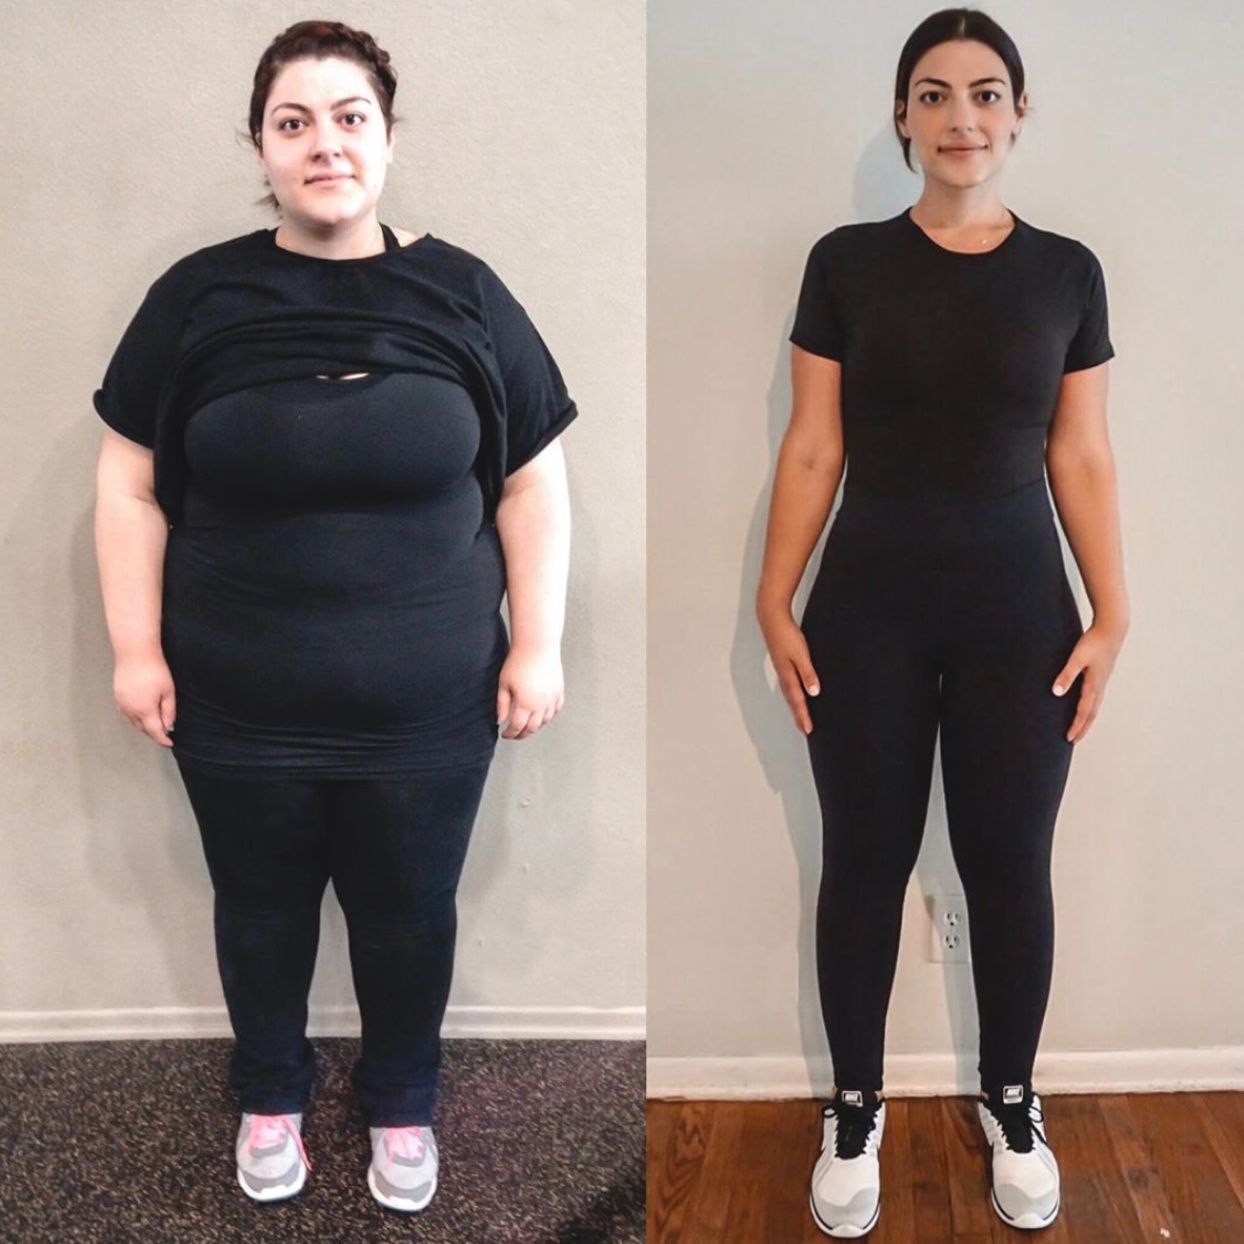 This Woman Learned Her Weight Loss Journey Wasn T Over Even After Losing 170 Pounds Shape after losing 170 pounds